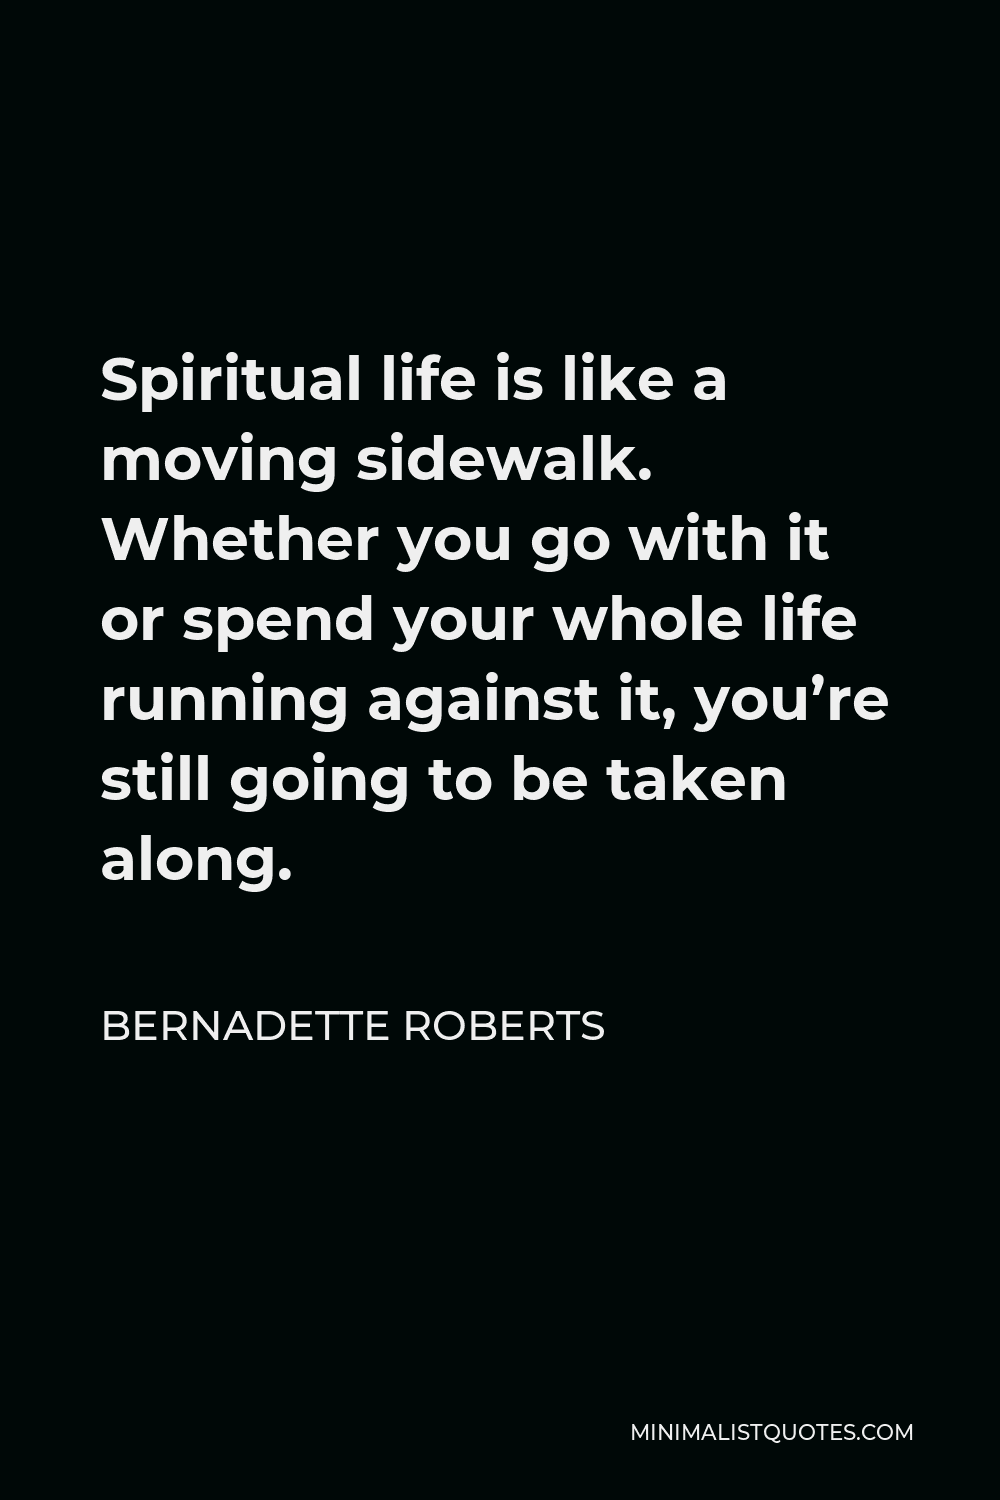 Bernadette Roberts Quote - Spiritual life is like a moving sidewalk. Whether you go with it or spend your whole life running against it, you’re still going to be taken along.